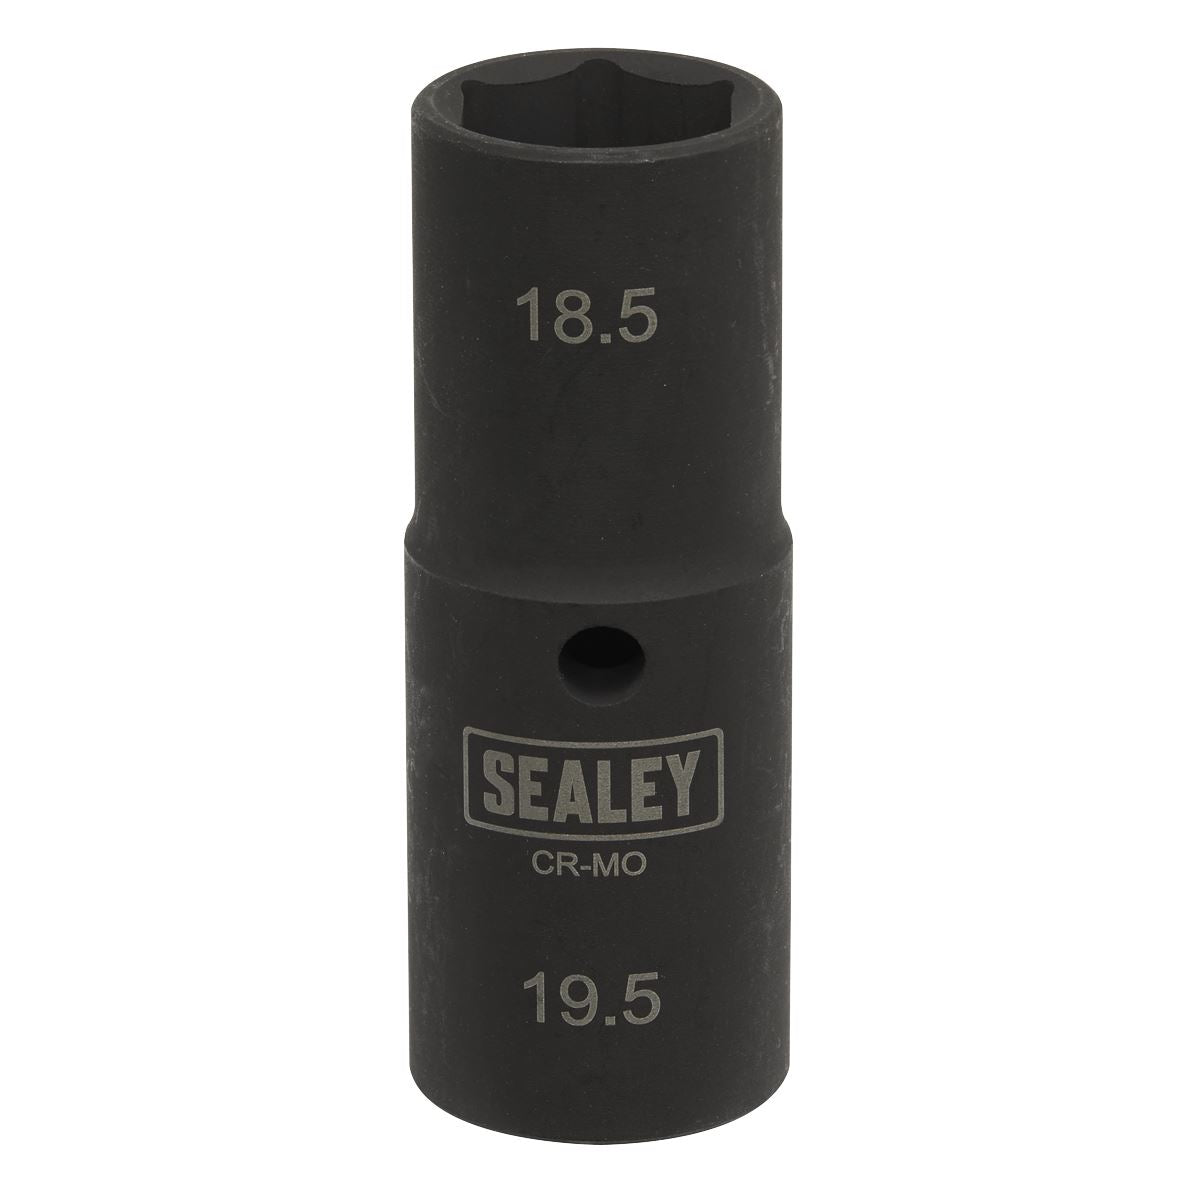 Sealey Deep Impact Socket 1/2" Drive Double Ended 18.5mm 19.5mm